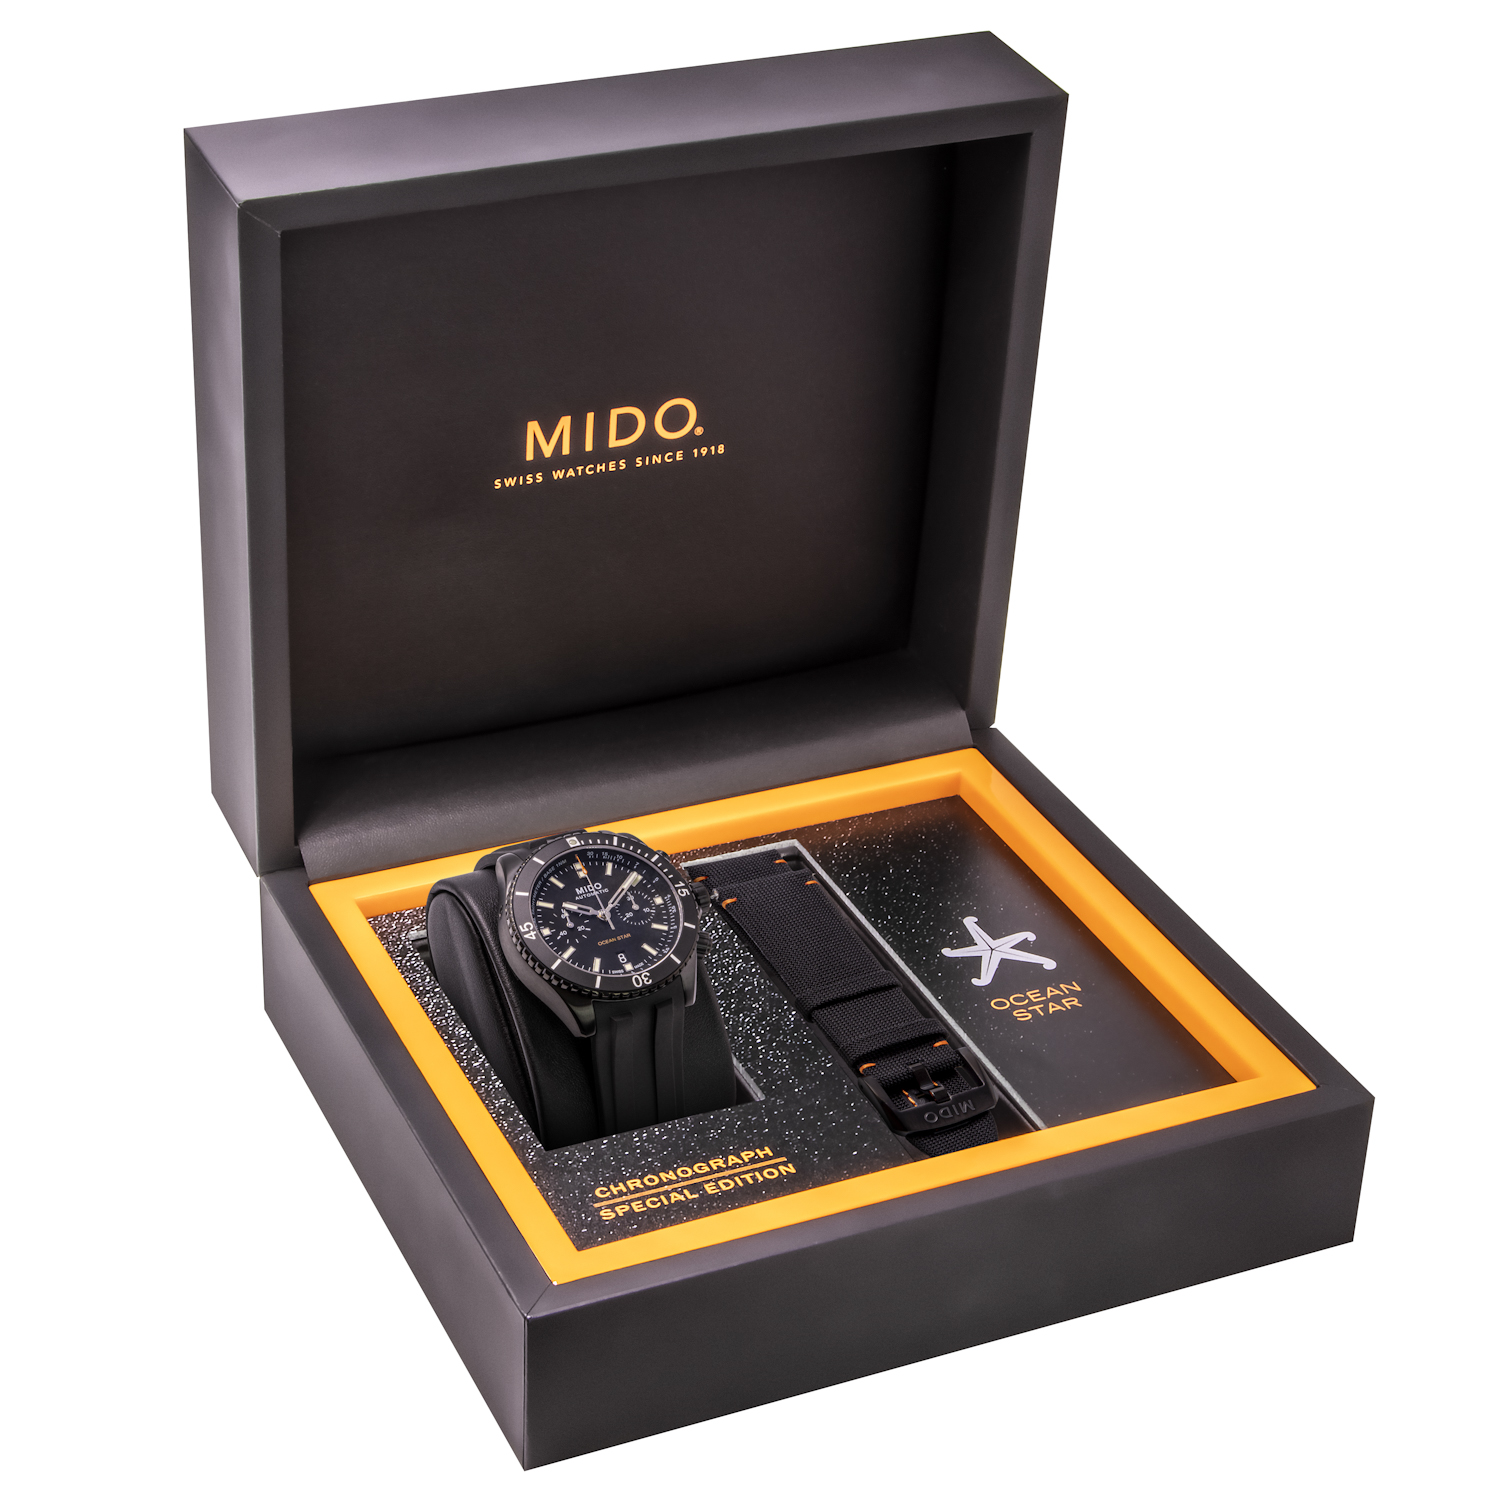 Mido Ocean Star Chronograph Special Edition timeandwatches.pl